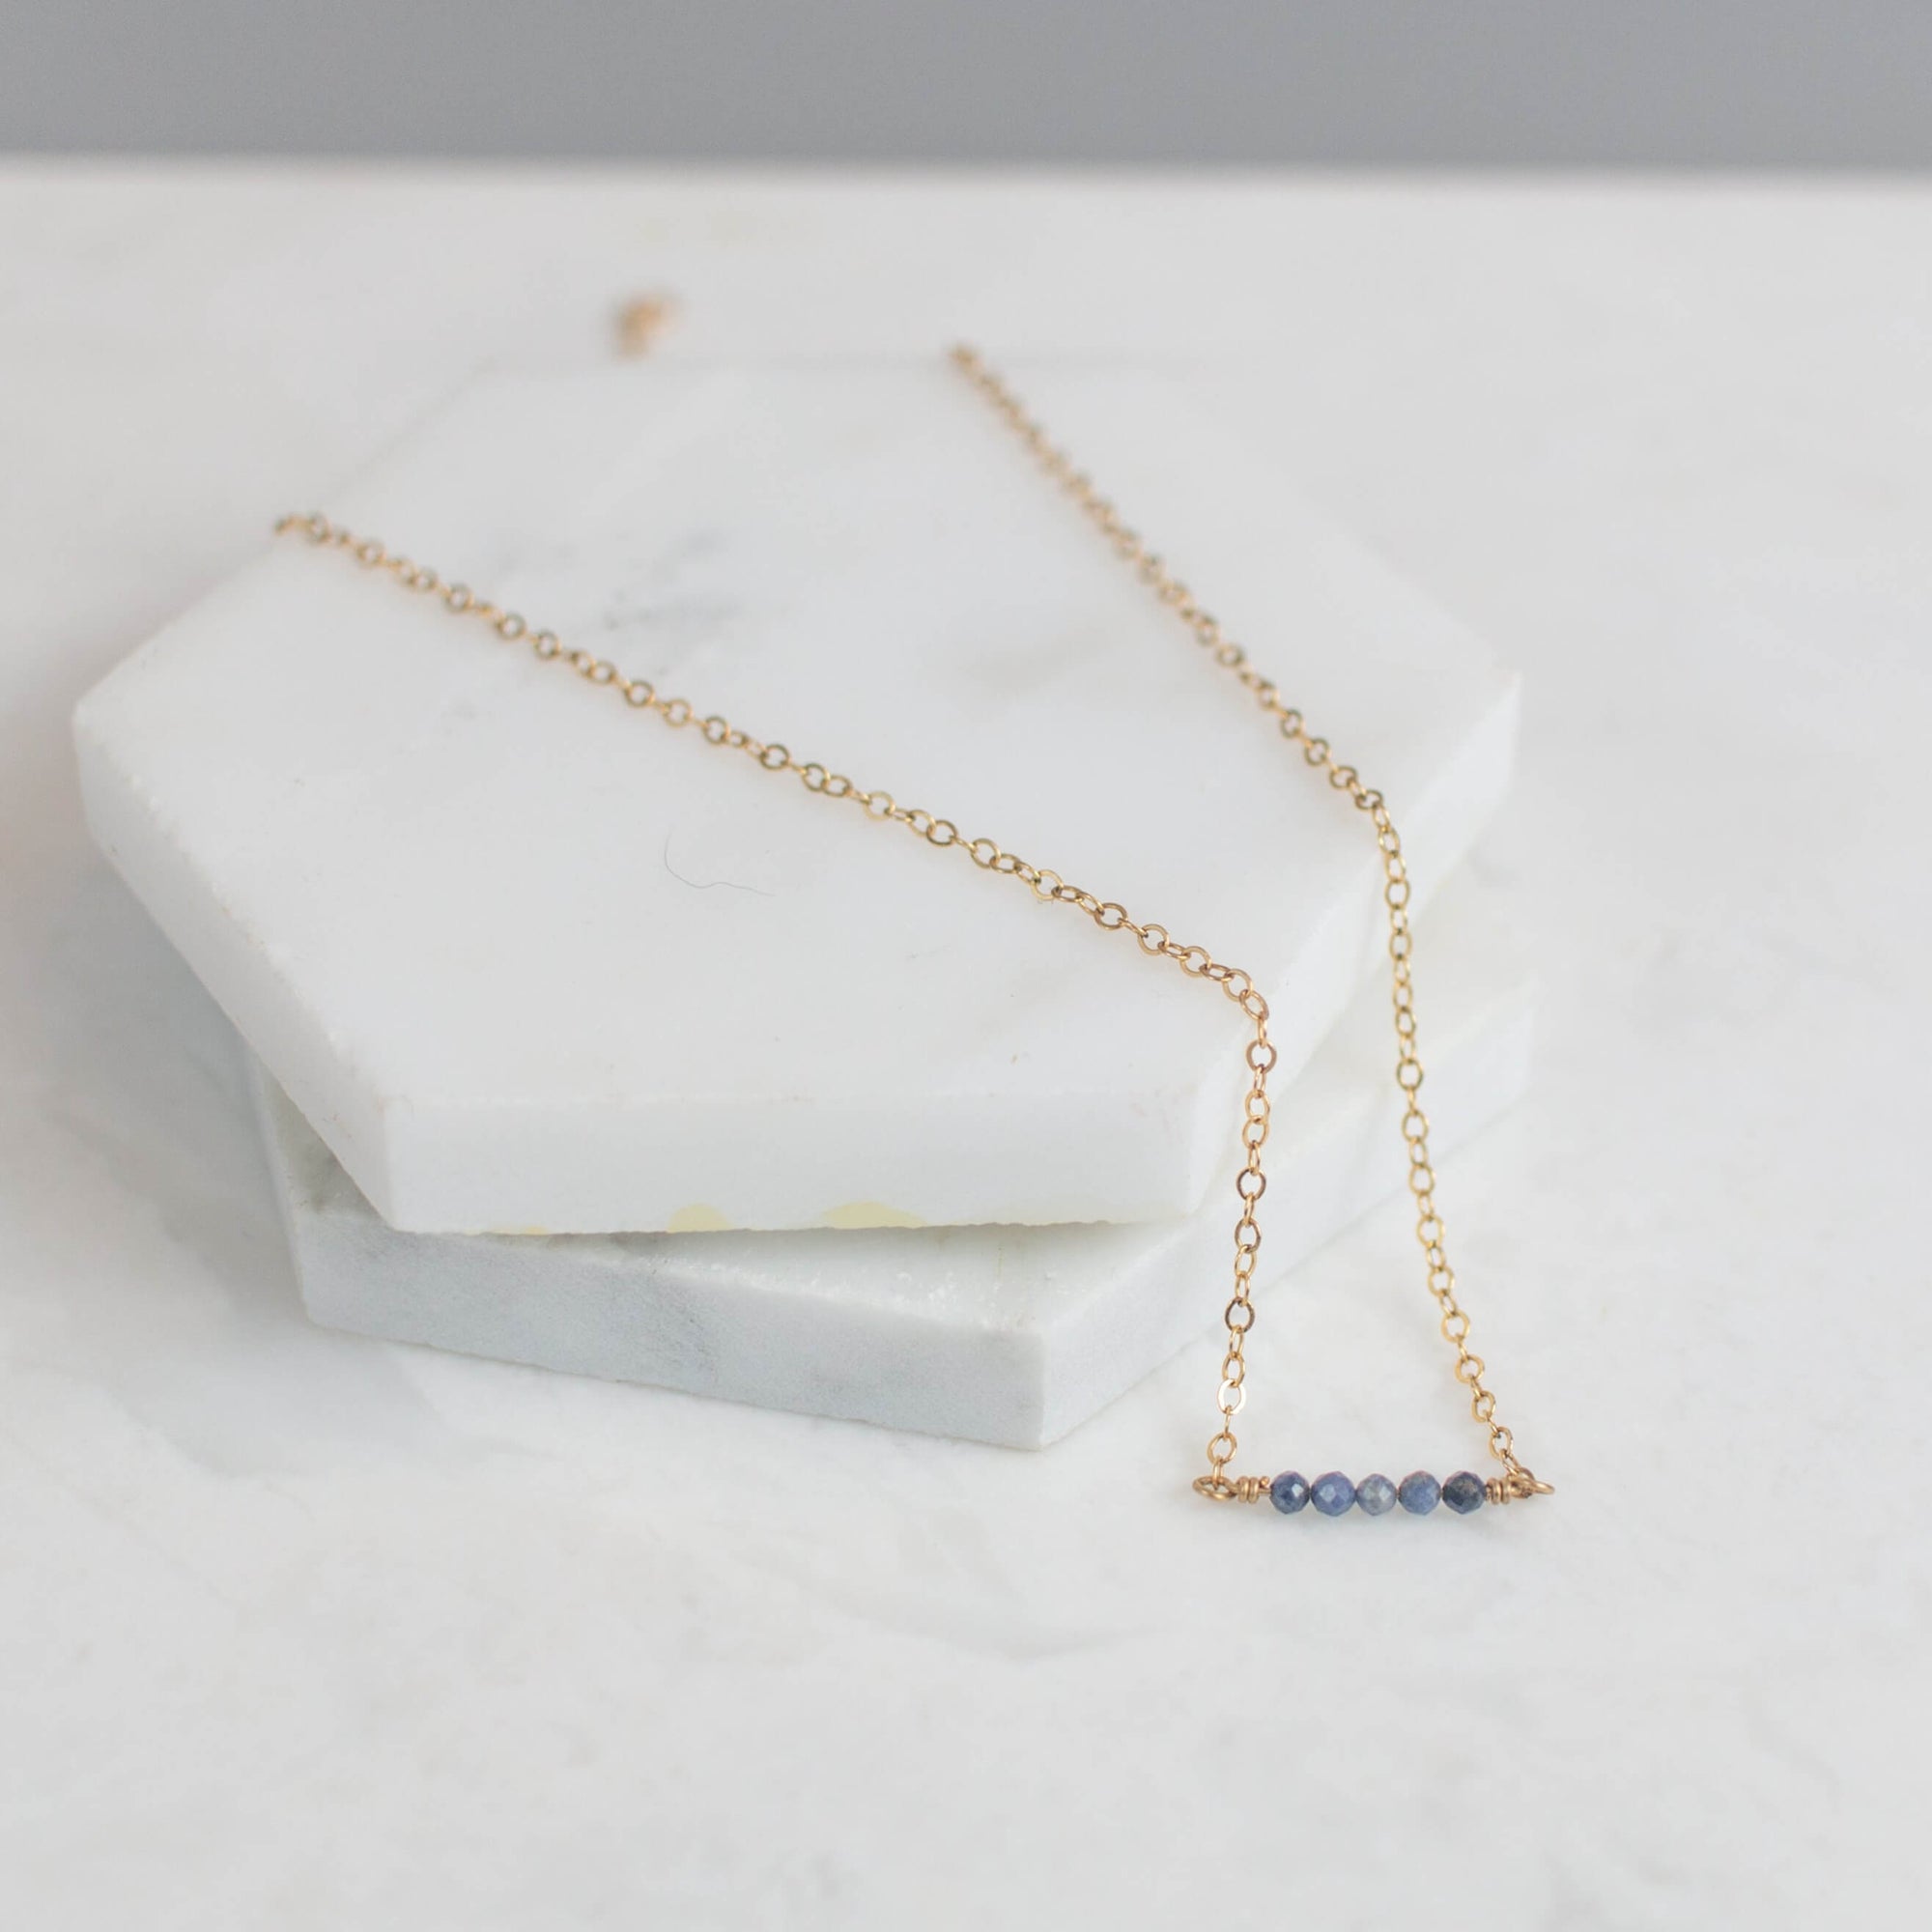 adalene dainty gold and sapphire necklace